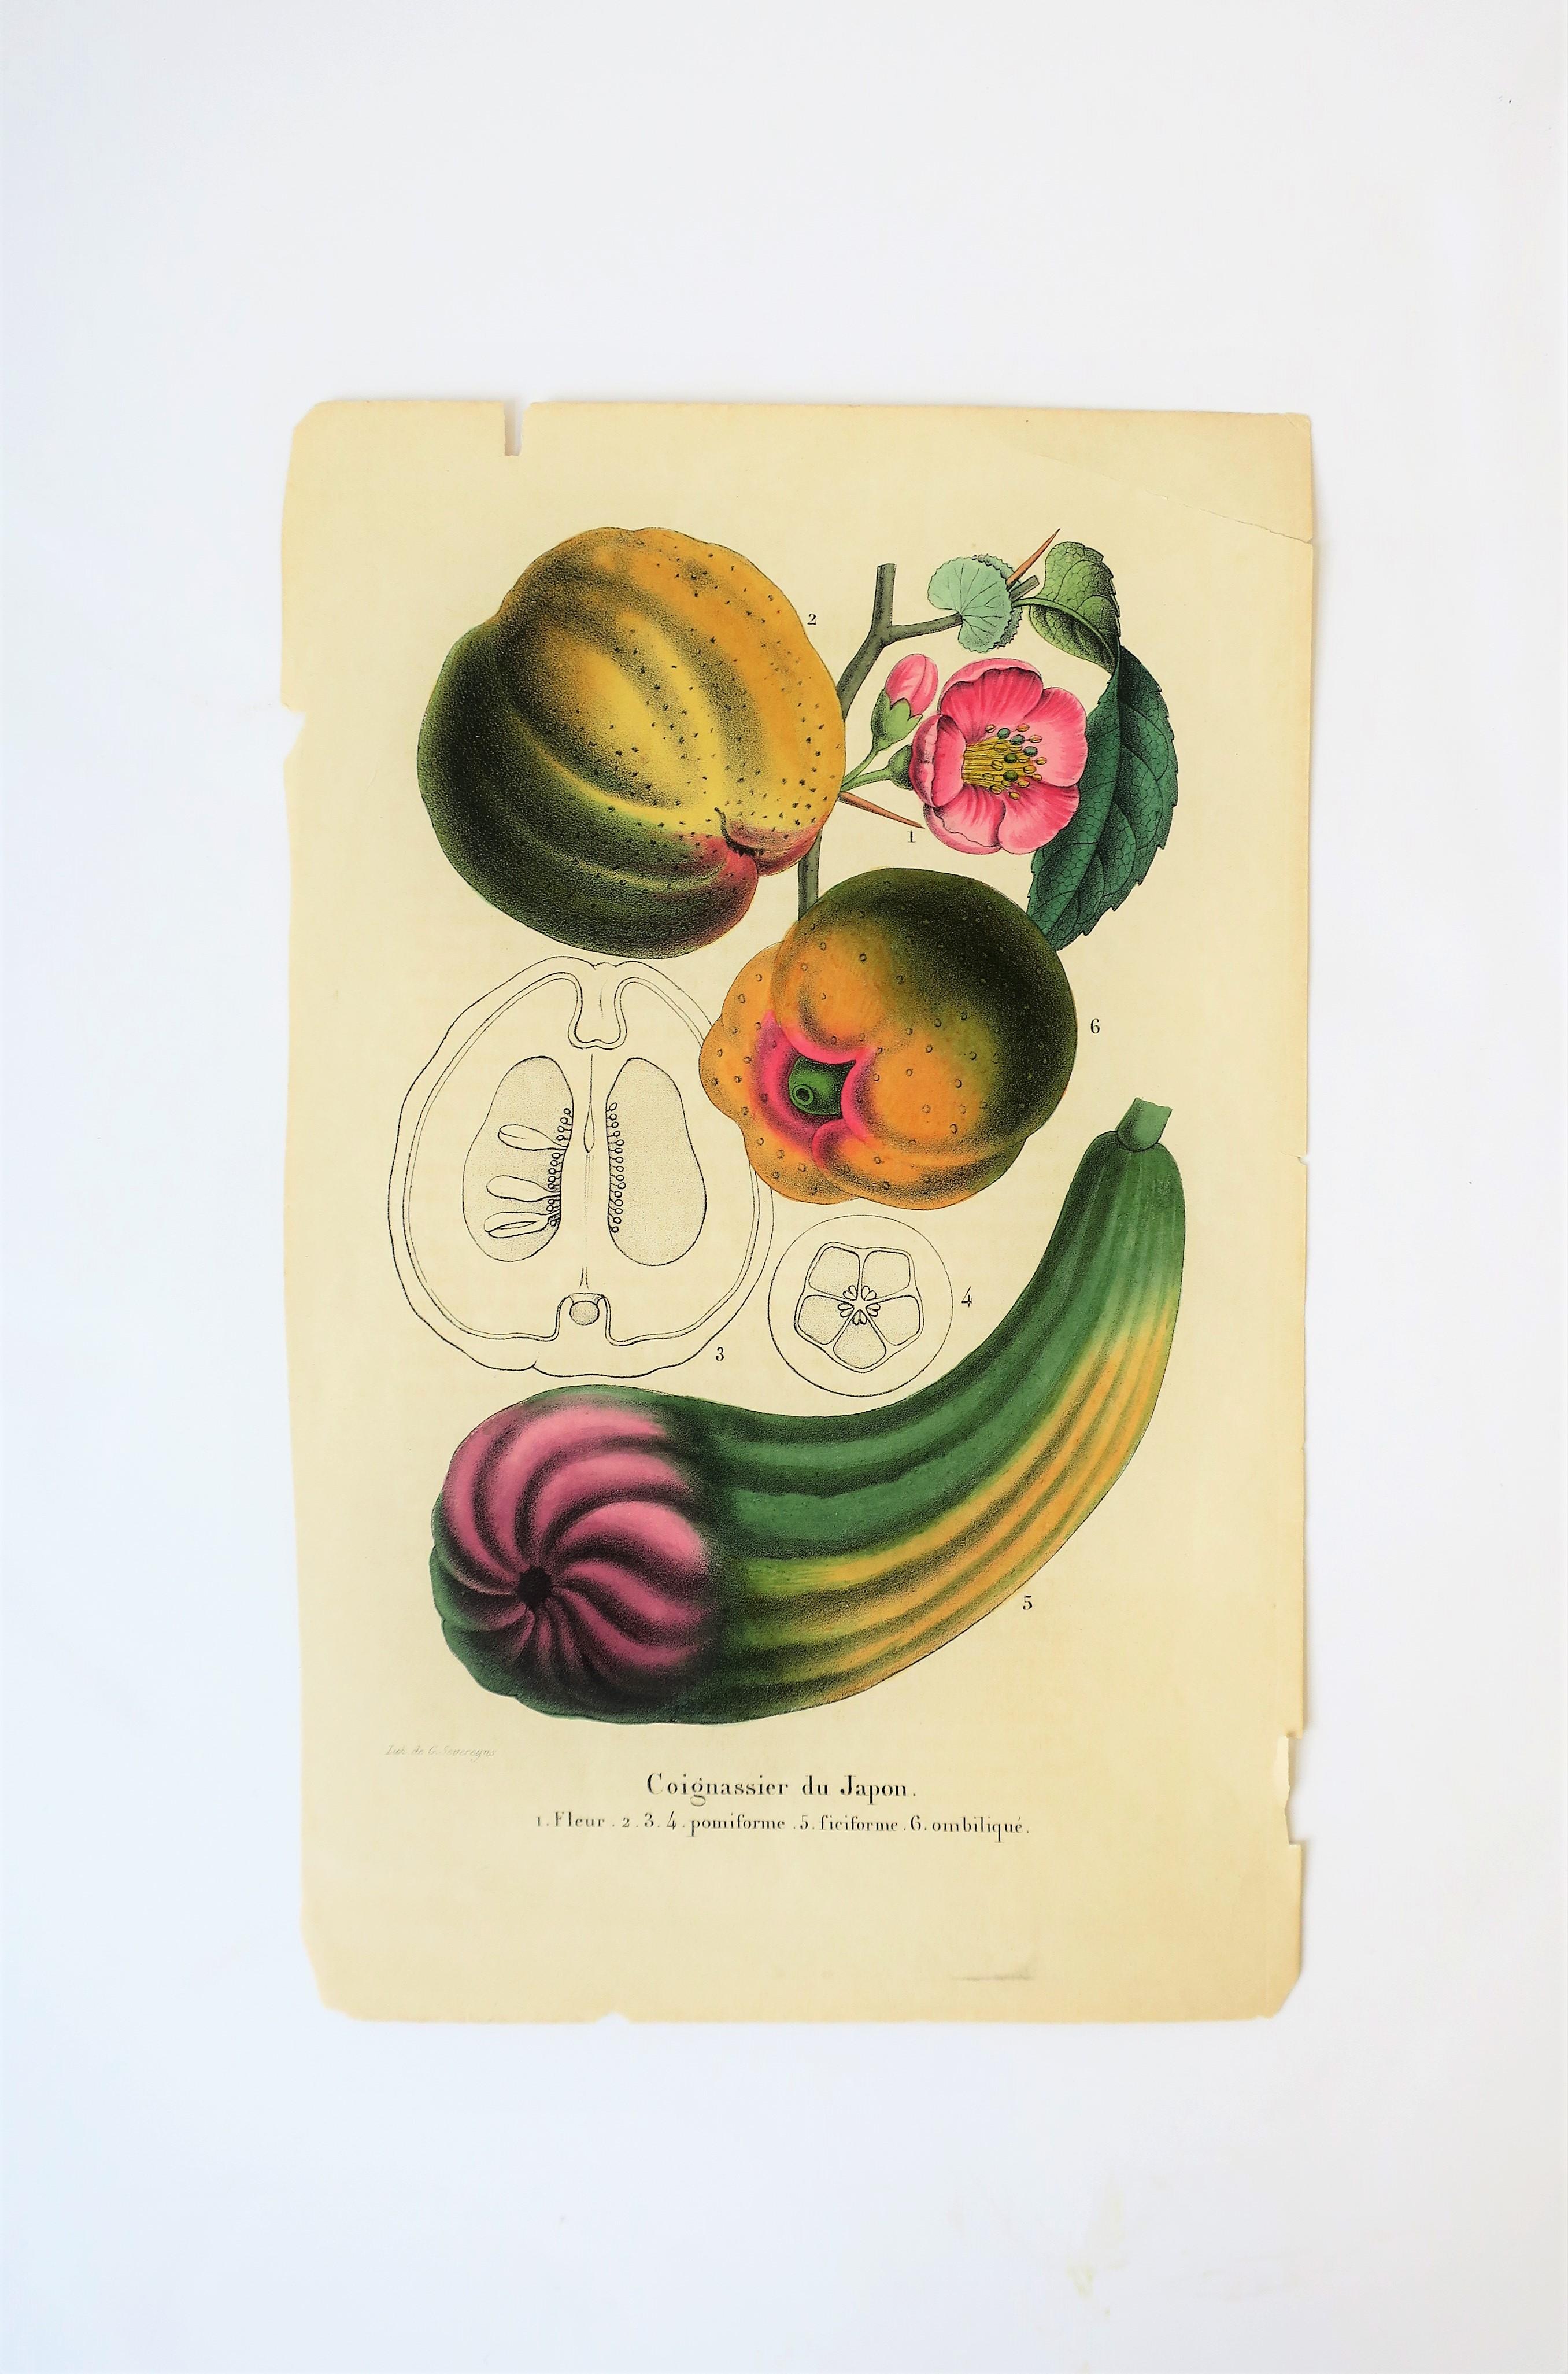 A very beautiful original Belgian exotic botanical vibrant color lithograph by de G. Severeyns, circa 19th century, Belgium. This beautiful design is comprised of flowers, leaves and fruits. Item is original, not a reprint, not a reproduction.